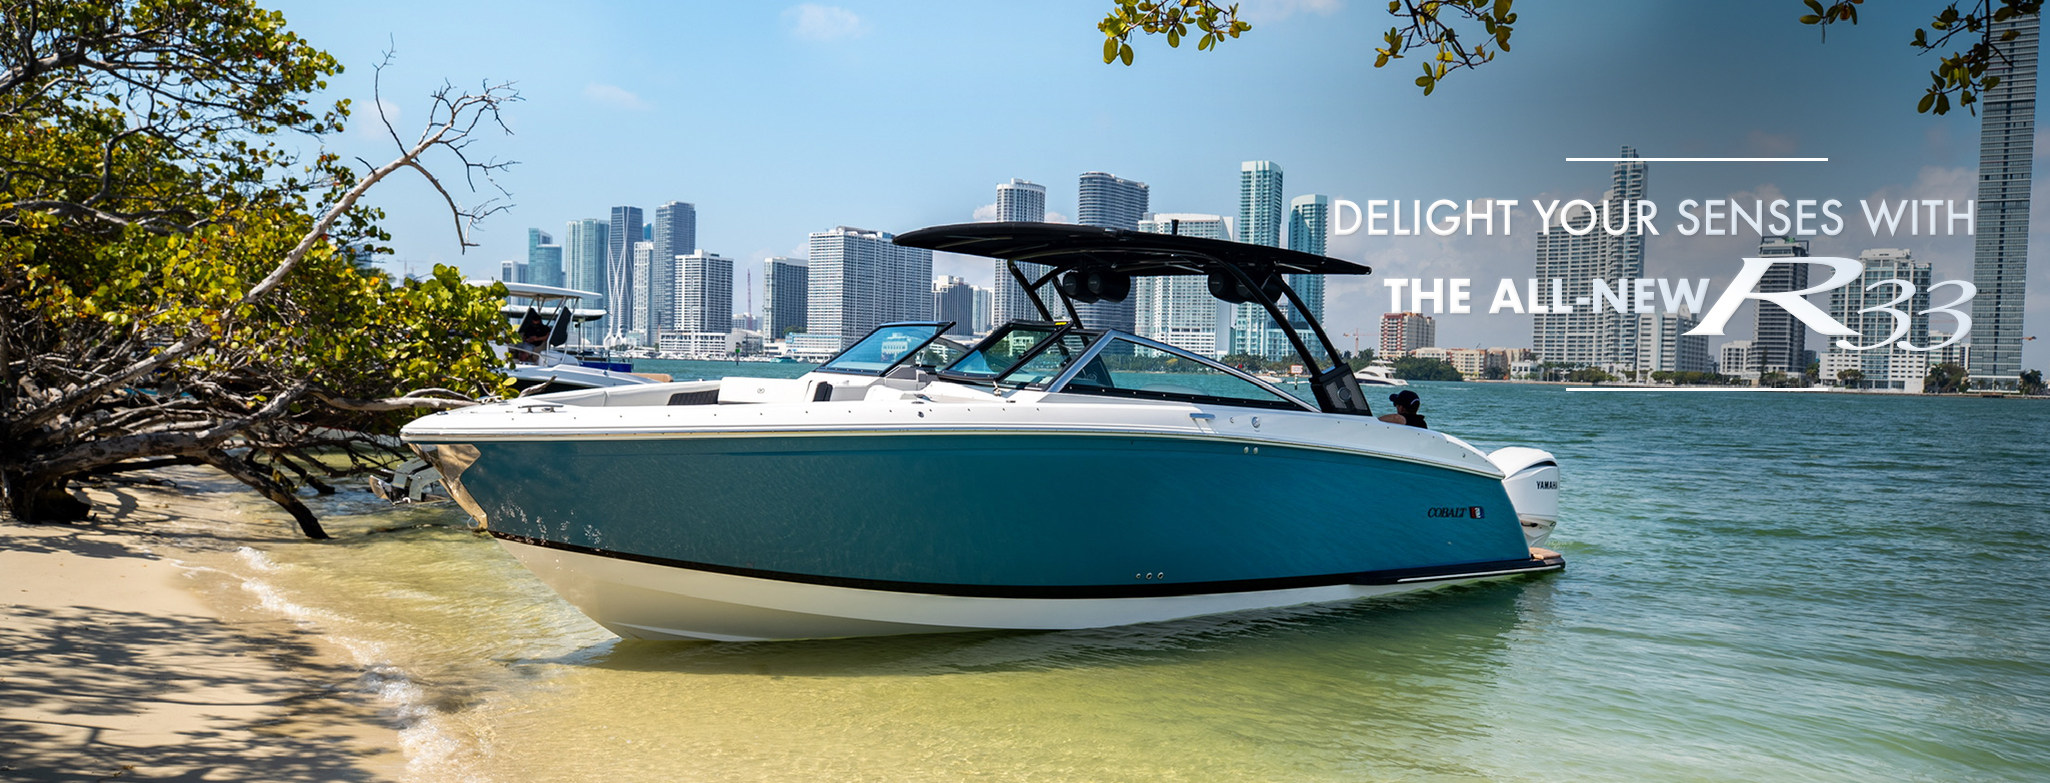 The new 2022 Cobalt Boats are available at Marine Connection West Palm Beach Miami Vero Beach Fort Lauderdale Islamorada and Stuart!